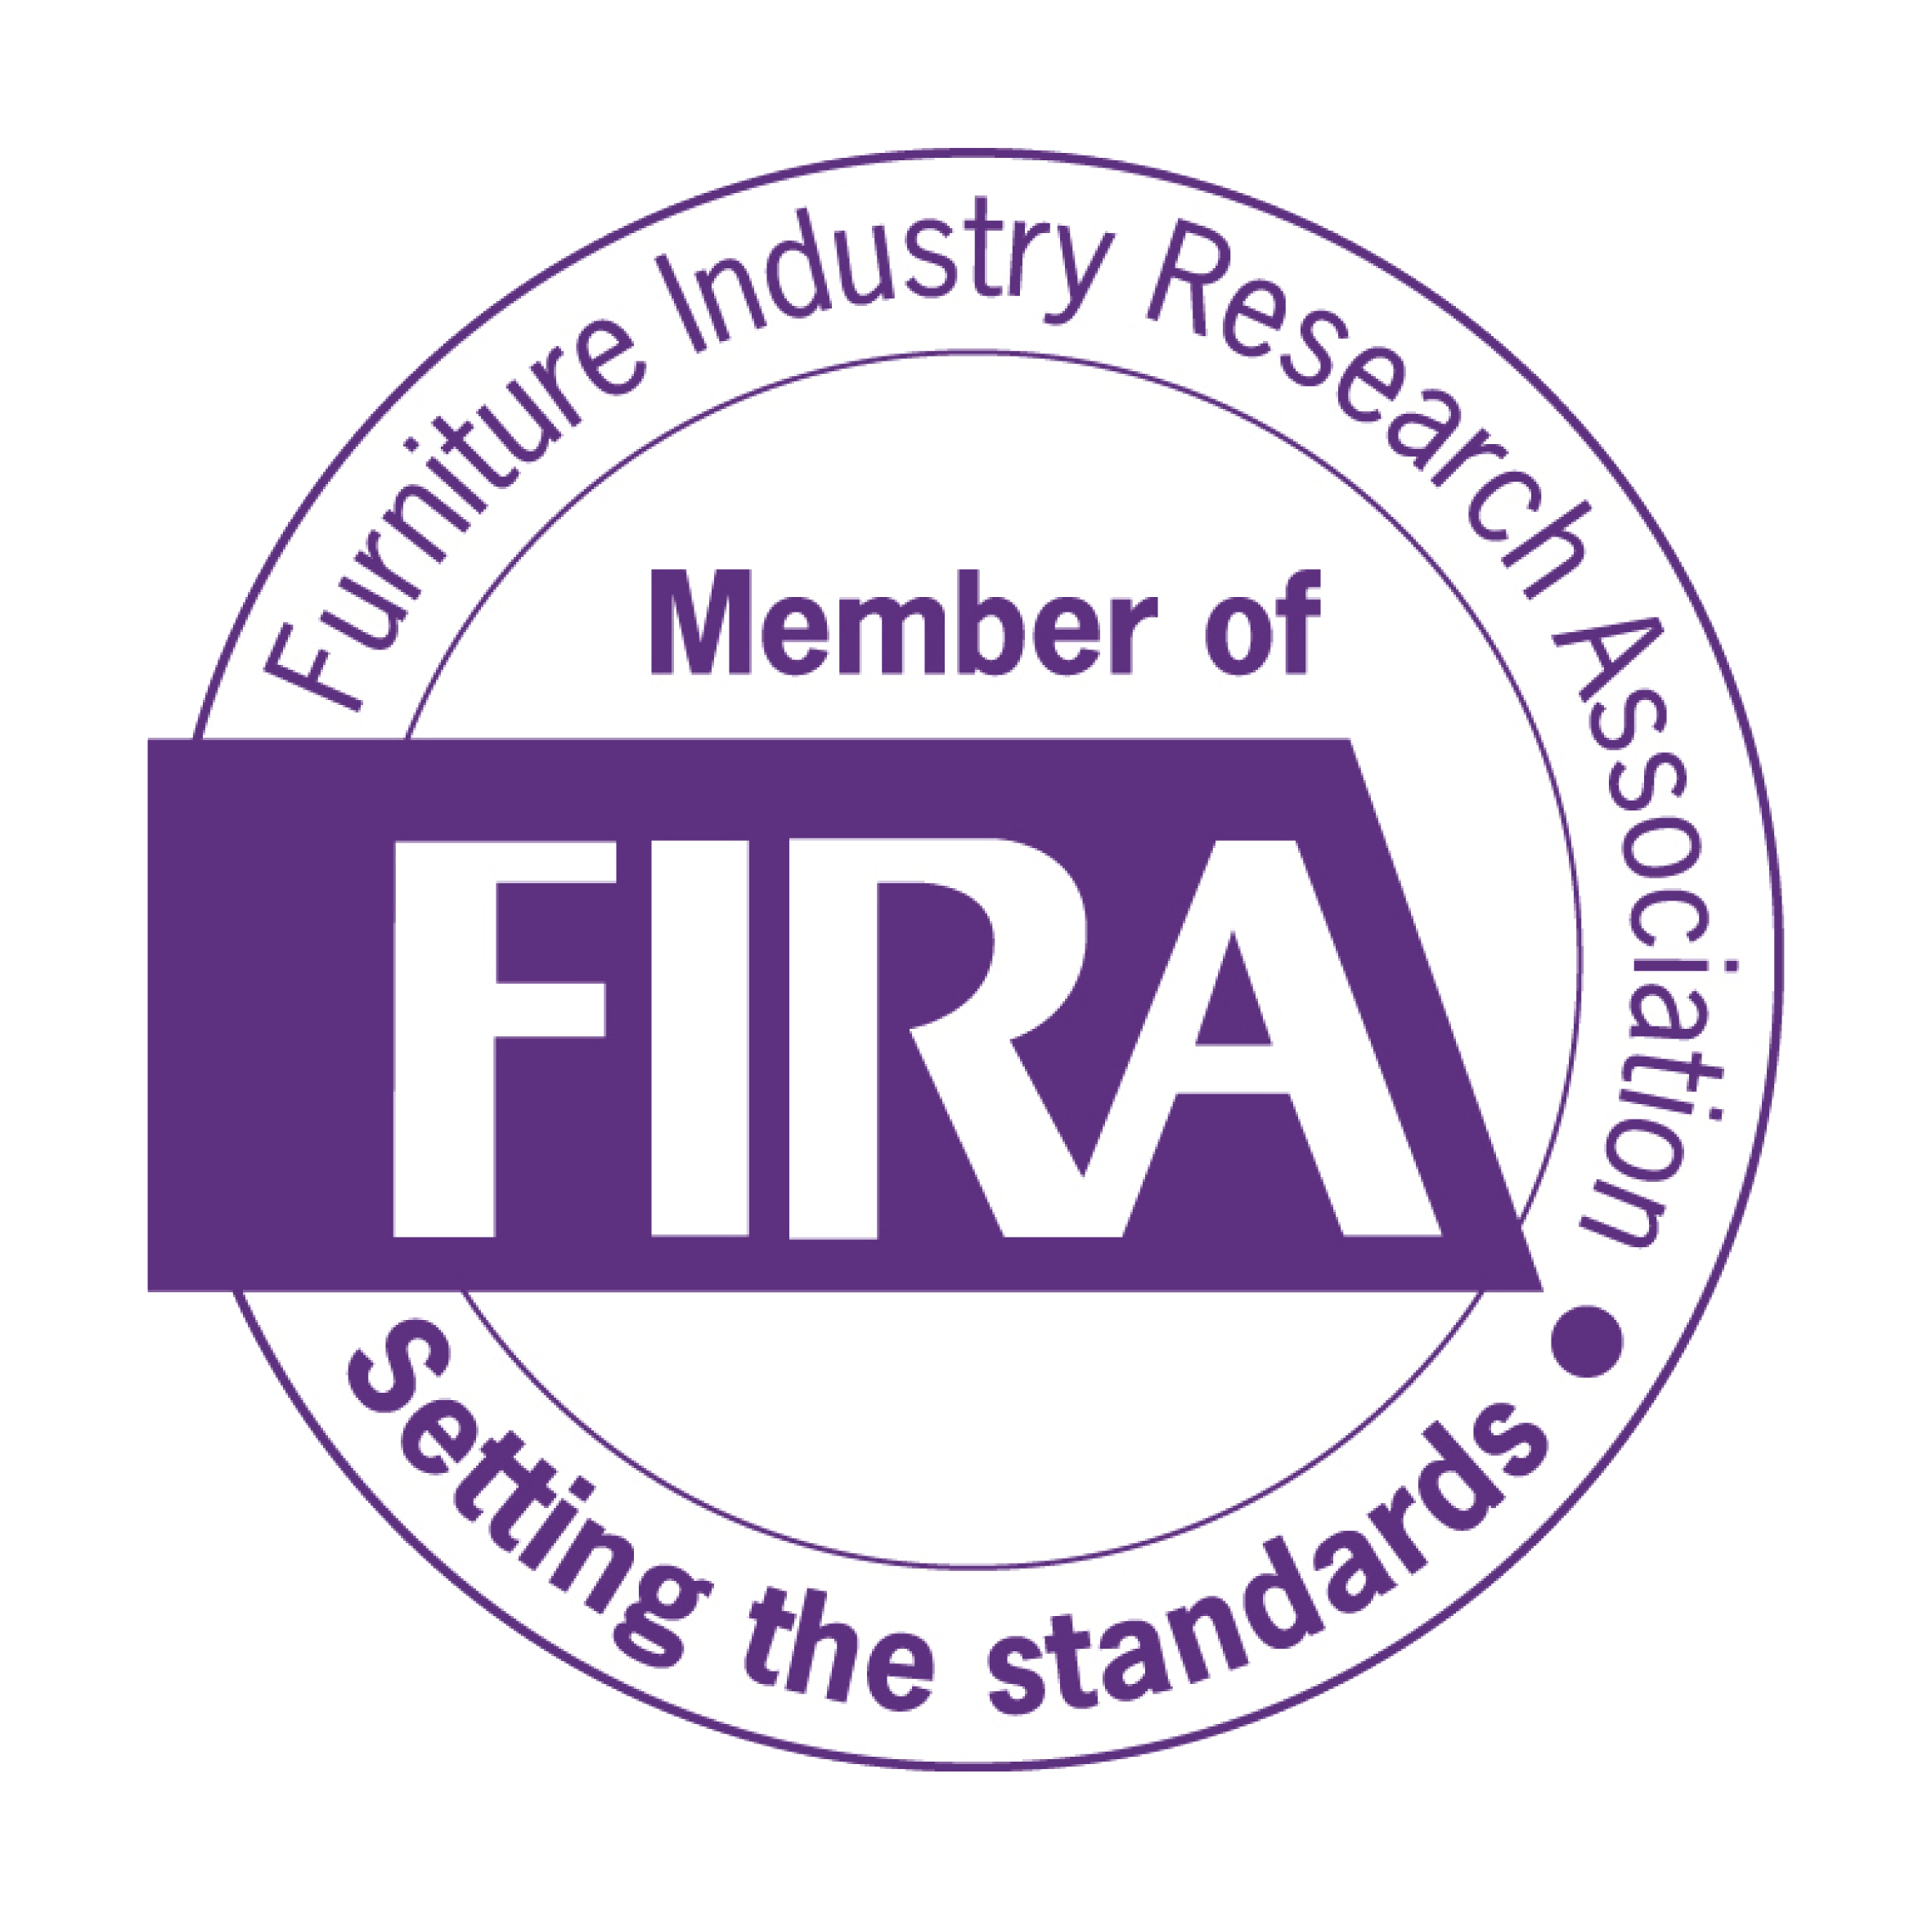 The Furniture Industry Research Association